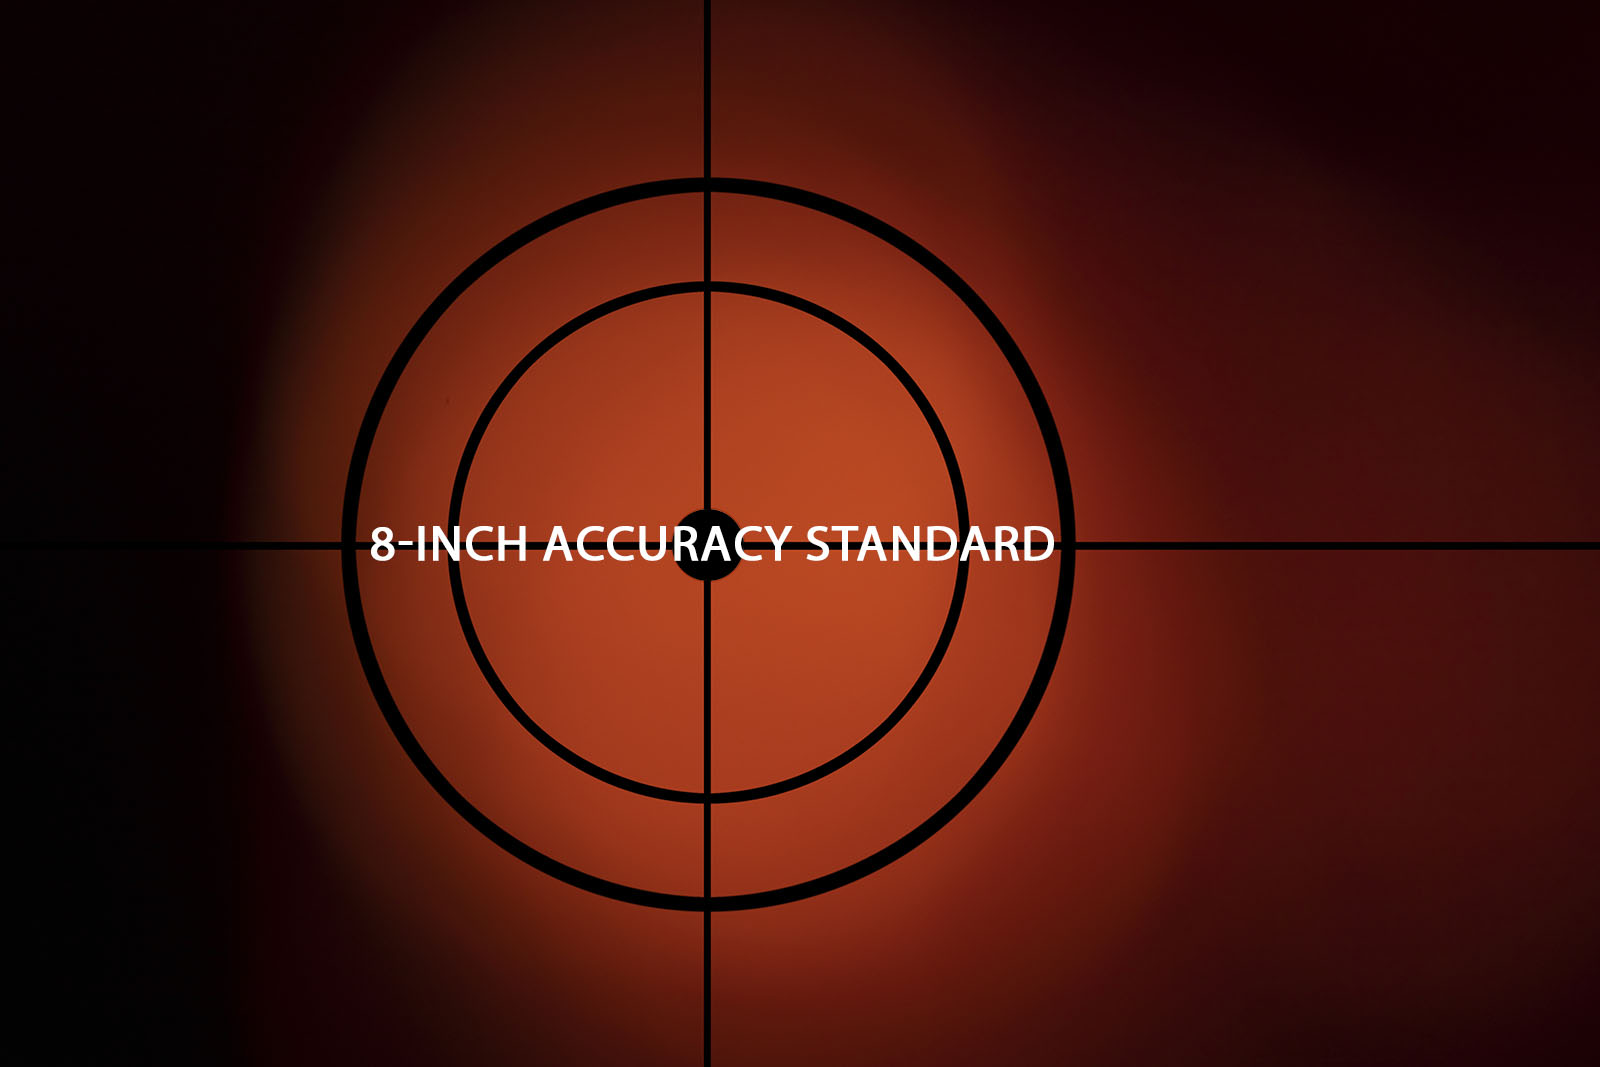 Accuracy Requirements for Defensive Ammo